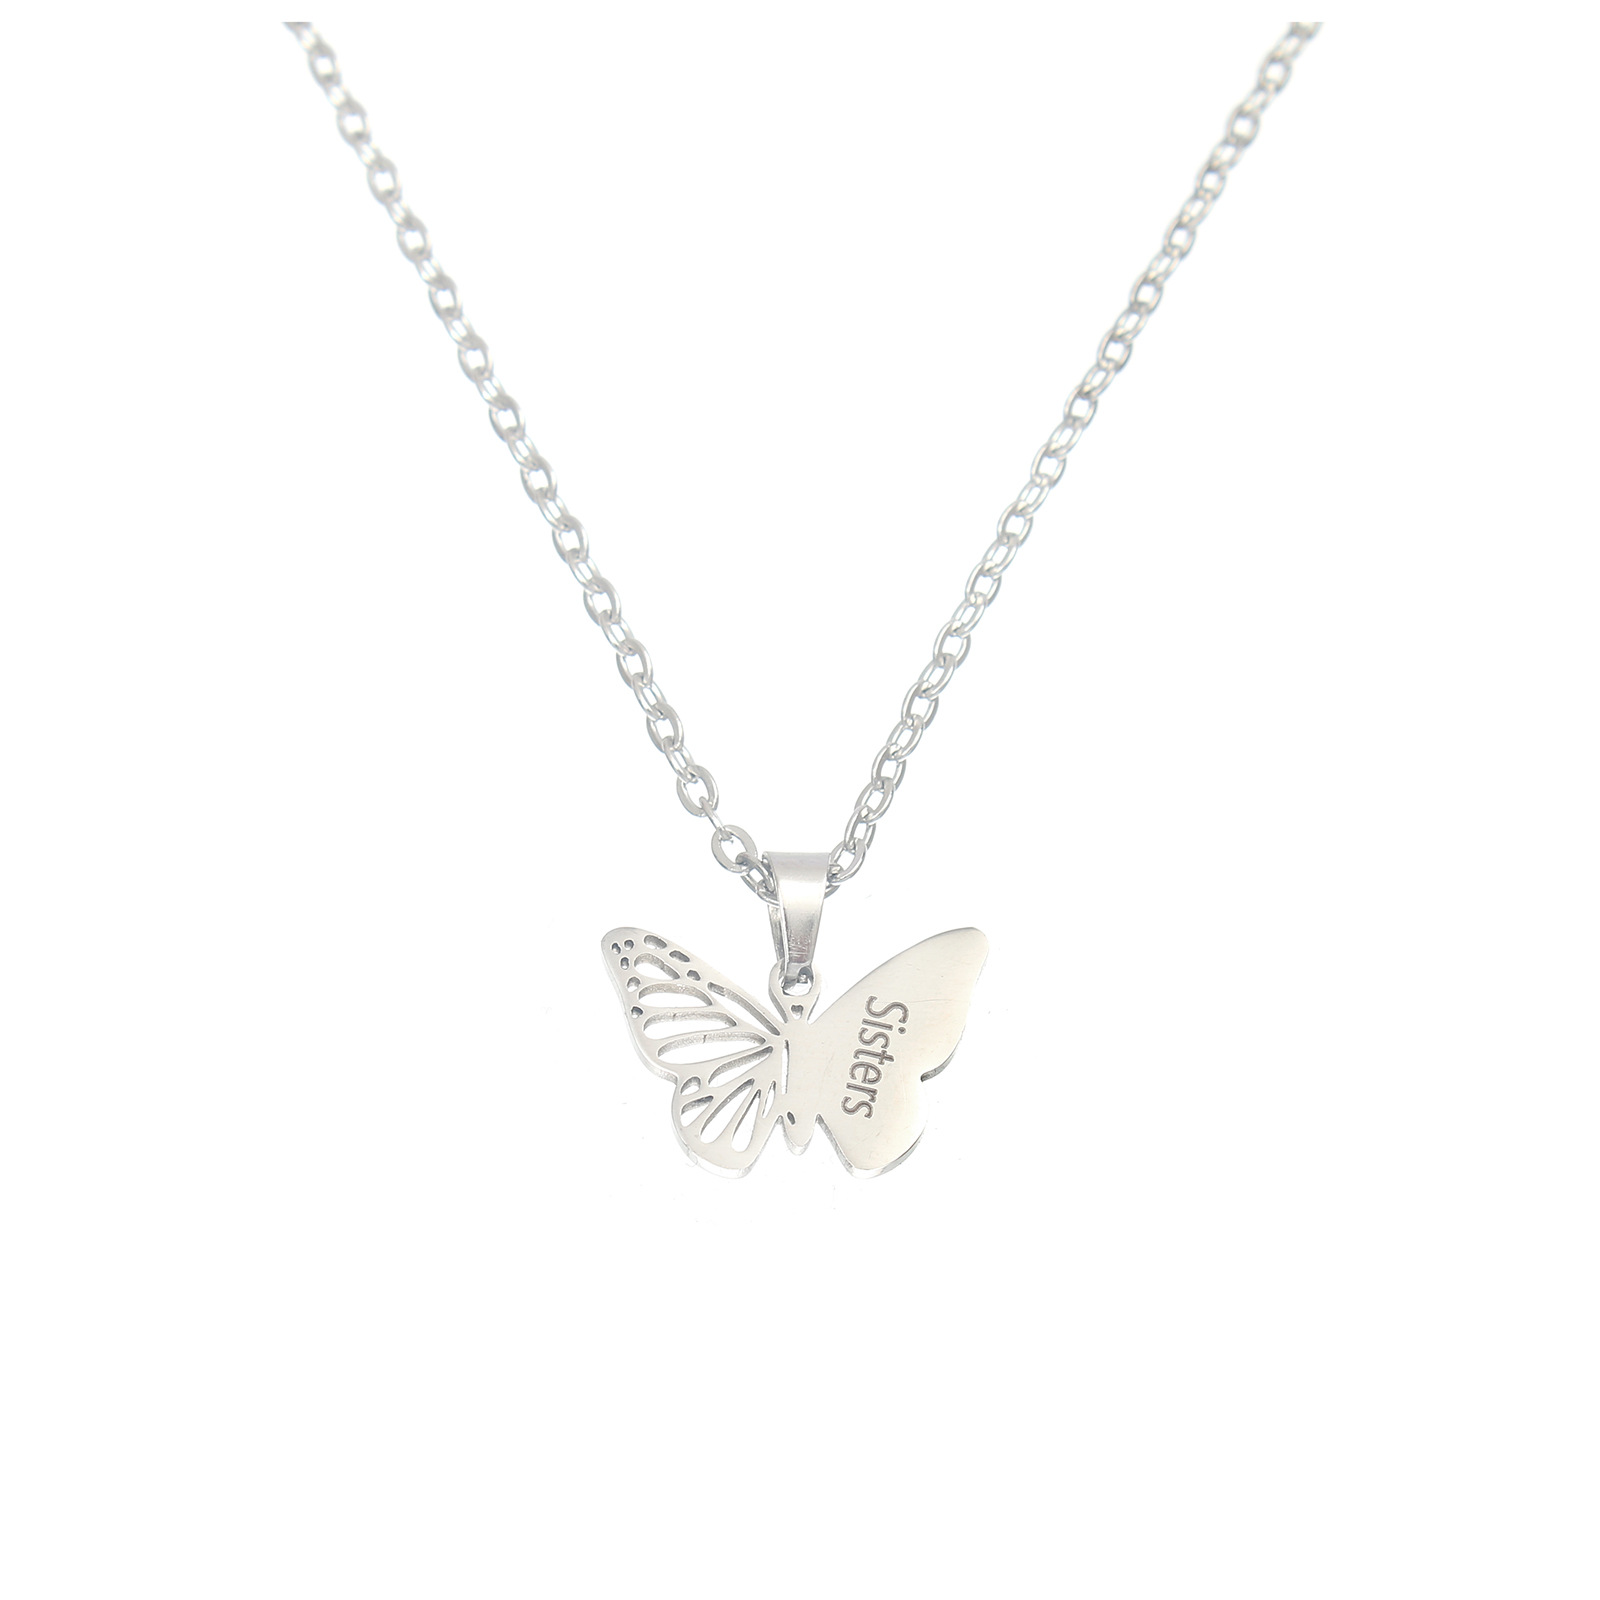 5:Silver Butterfly Sisters engraved necklace